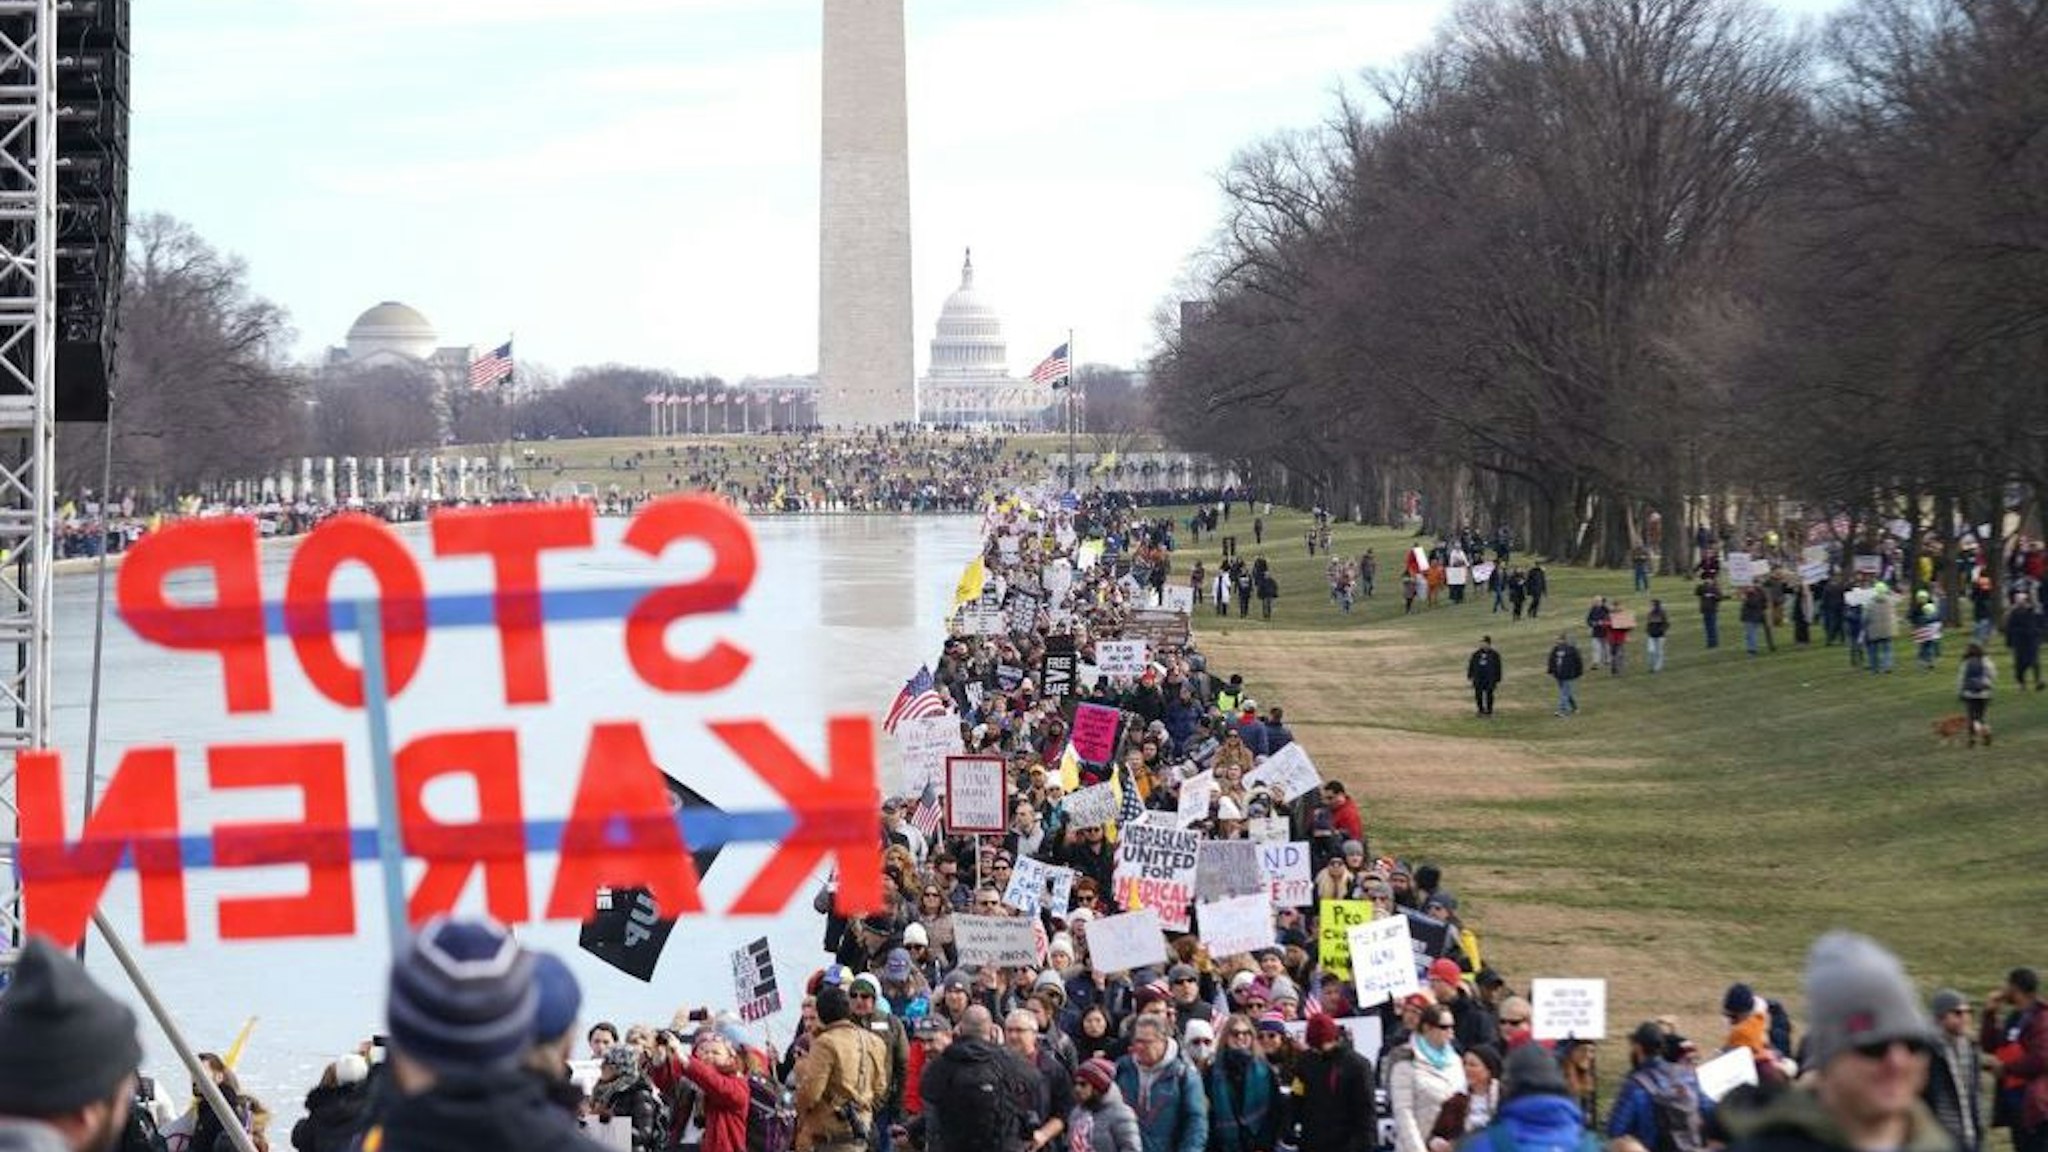 Demonstrators participate in a Defeat the Mandates march ate the Lincoln Memorial reflecting pool in Washington, DC, on January 23, 2022. - Demonstrators are protesting mask and Covid-19 vaccination mandates. (Photo by Stefani Reynolds / AFP) (Photo by STEFANI REYNOLDS/AFP via Getty Images)